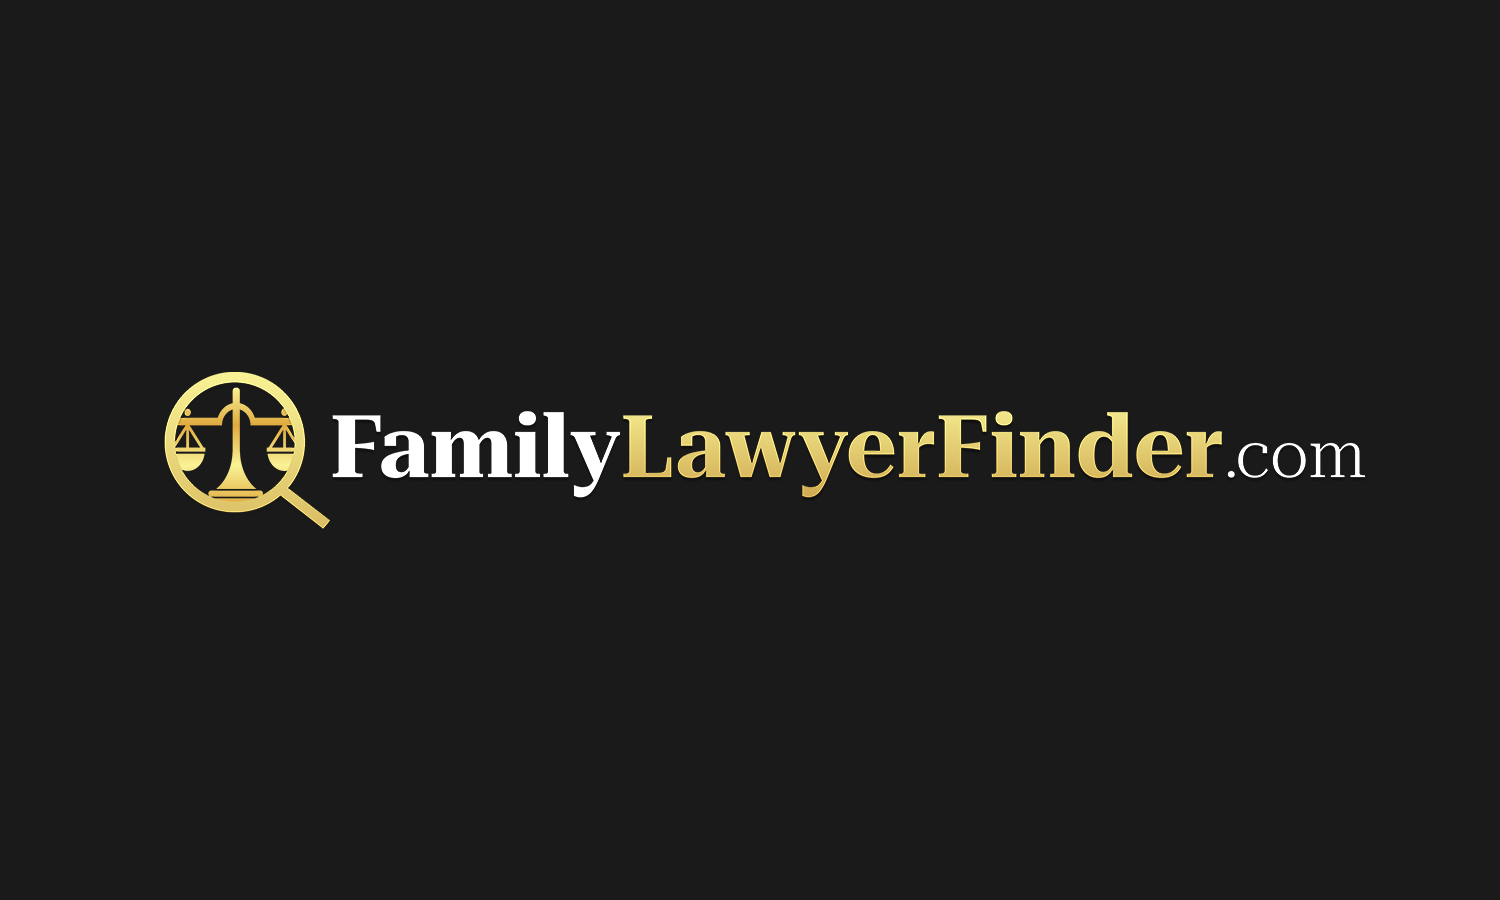 The Best 12 Family Lawyers In New York (Updated 2023) | ⚖️ Top Rated Family Solicitors by Family Lawyer Finder New York ™